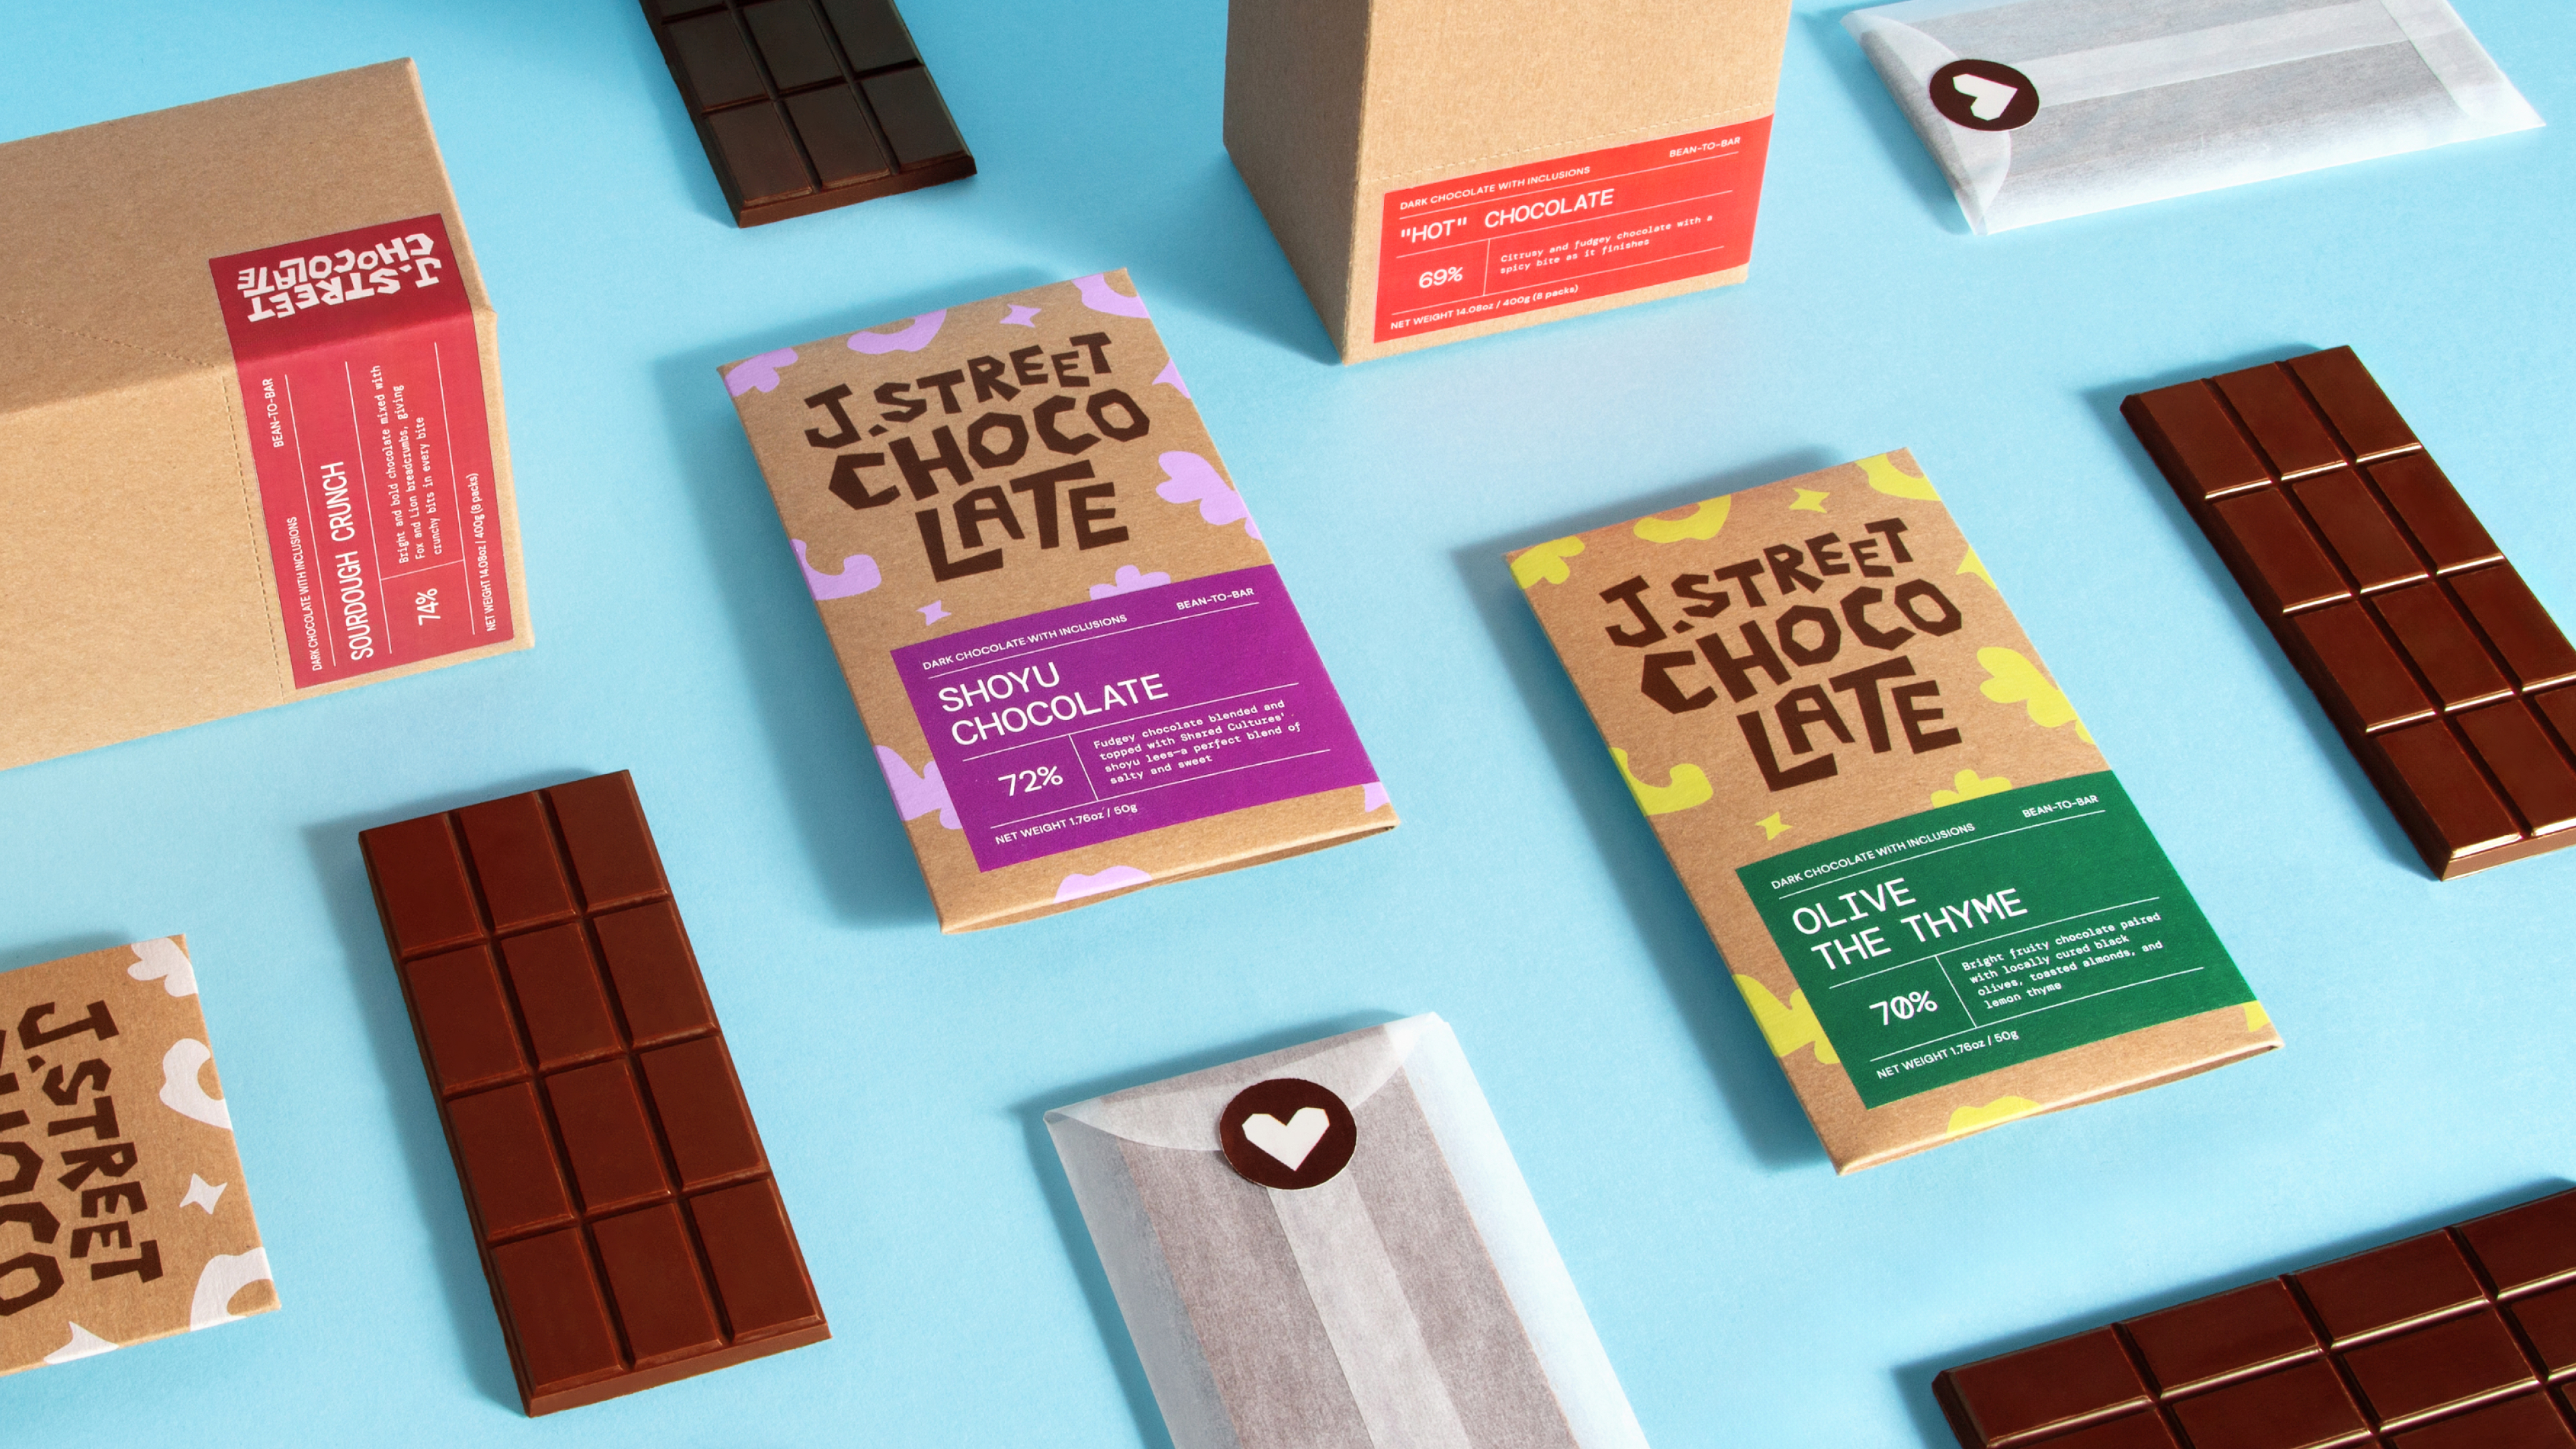 photo of the J. Street Chocolate packaging collection to show hoe the system works together